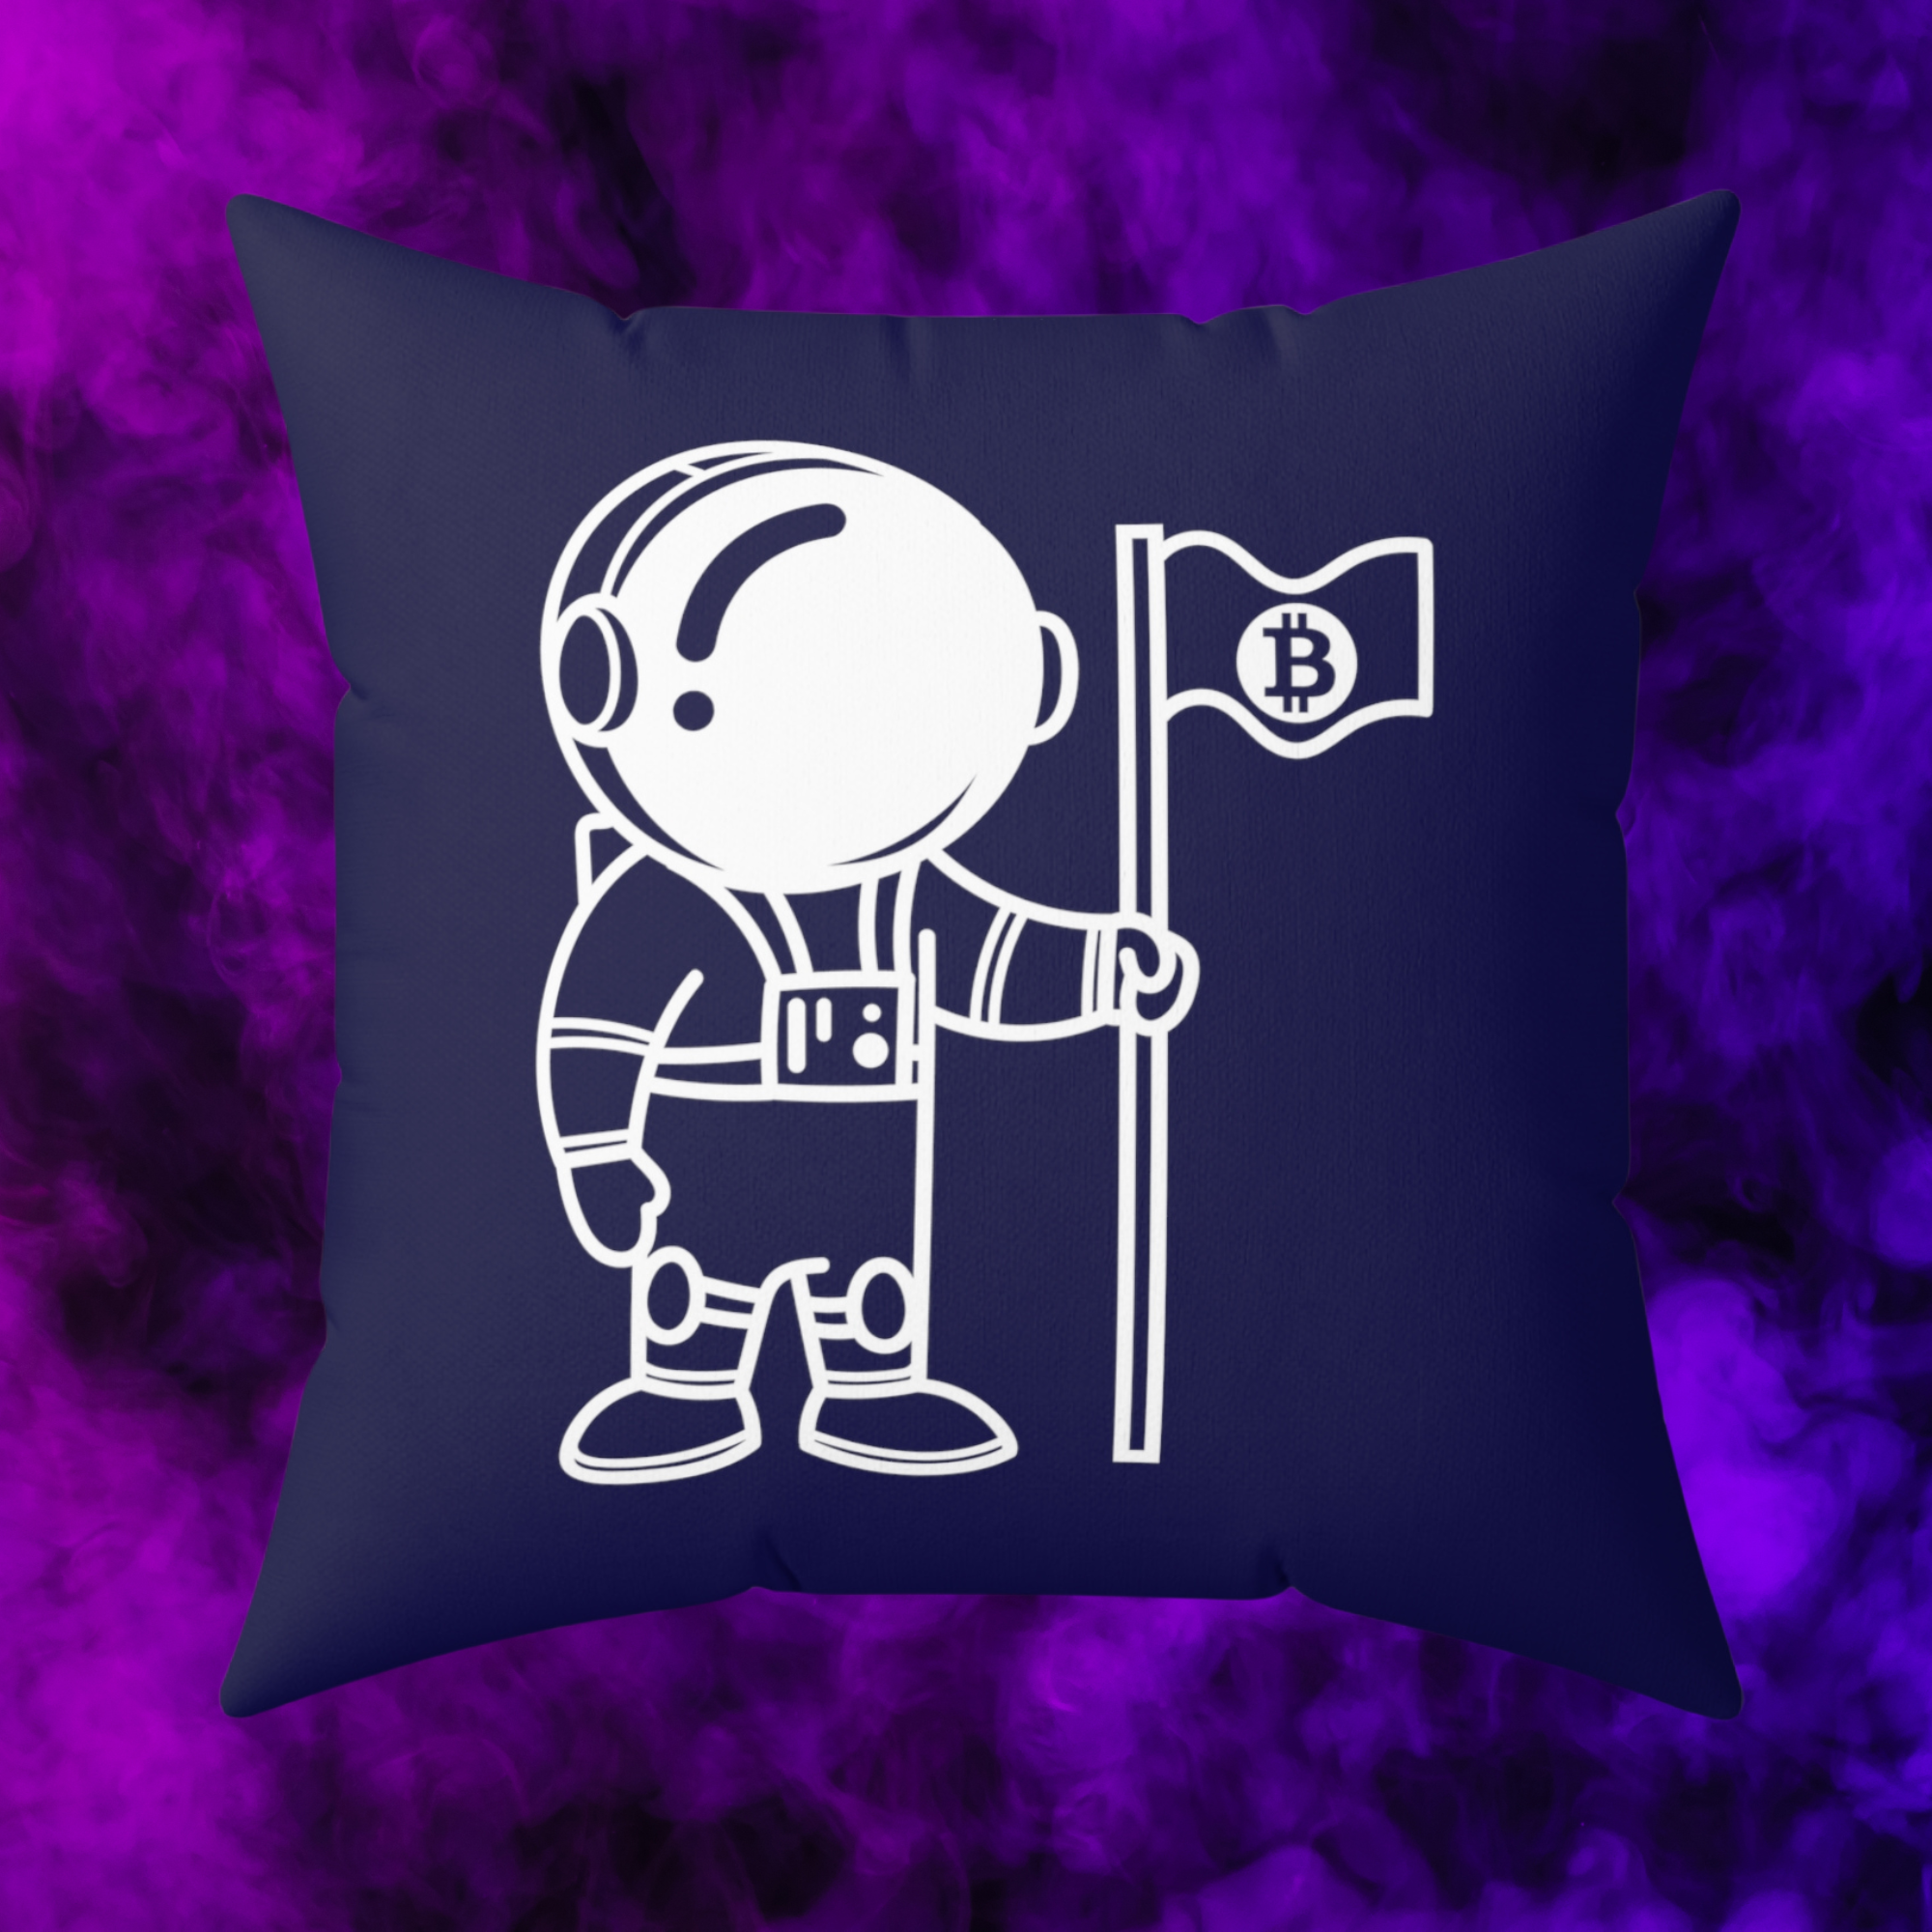 Bitcoin Home Decor - Bitcoin To The Moon Pillow. Available from NEONCRYPTO STORE.